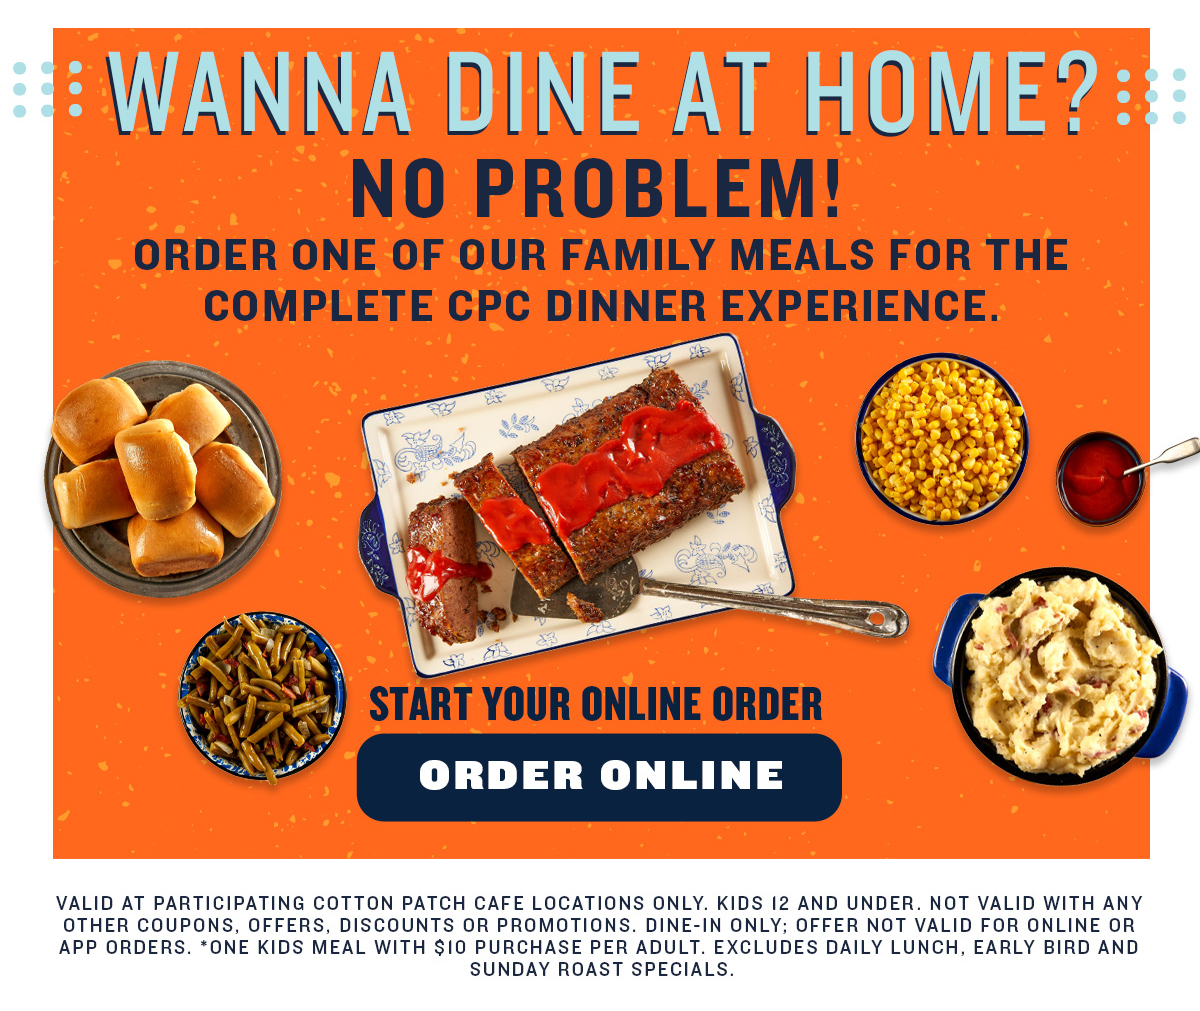 Order one of our Family Meals for the Complete CPC dinner experience